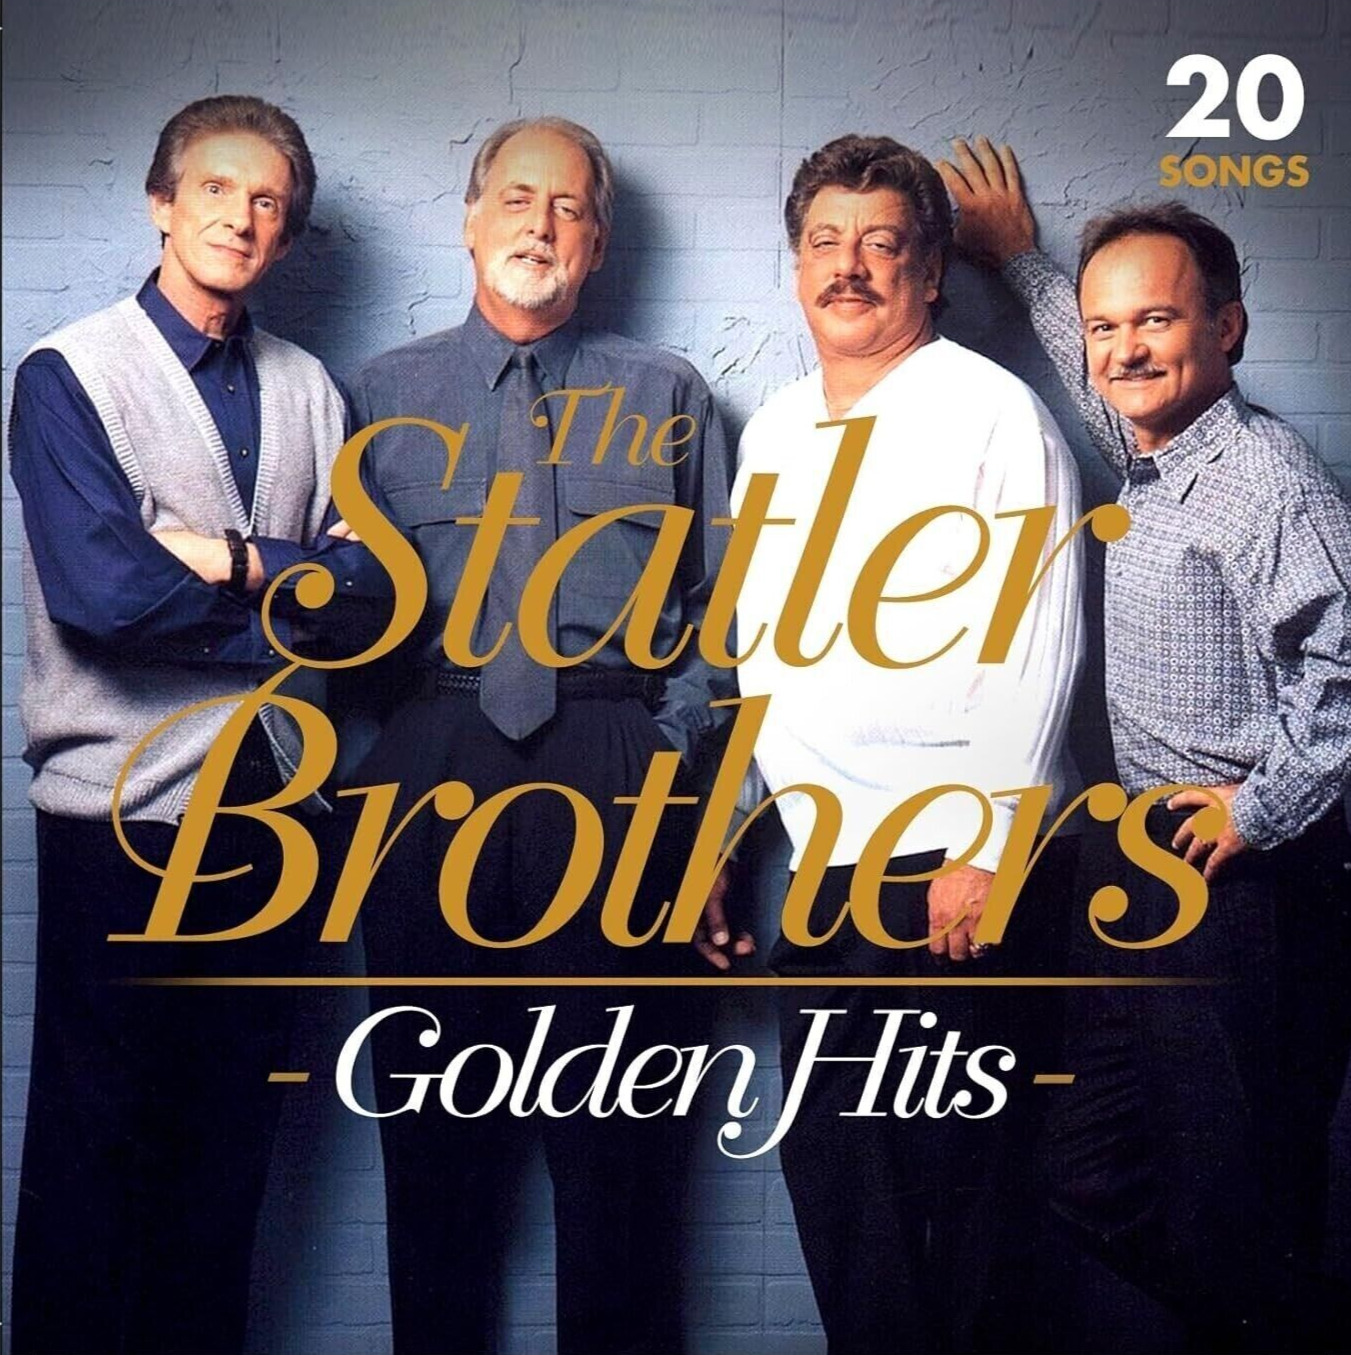 Golden Hits - The Statler Brothers [20 Songs] (CD, 2019, Music)